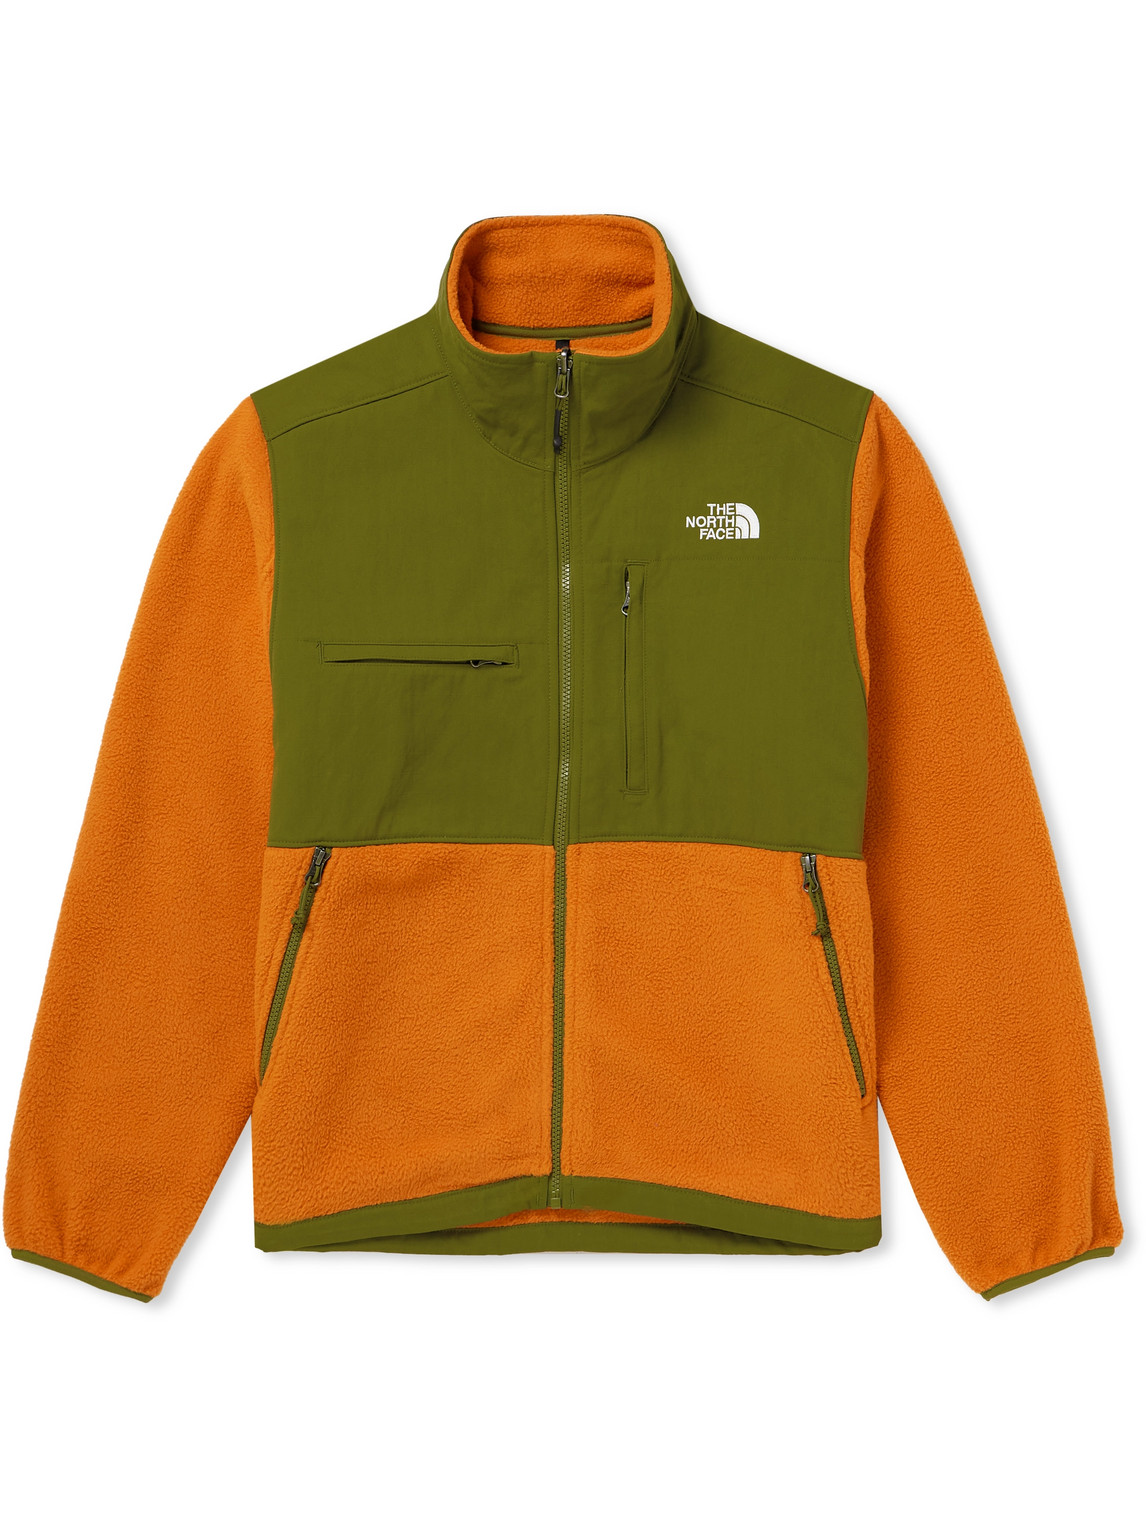 The North Face - Denali Logo-Embroidered Ripstop-Trimmed Recycled-Fleece Jacket - Men - Orange - S von The North Face